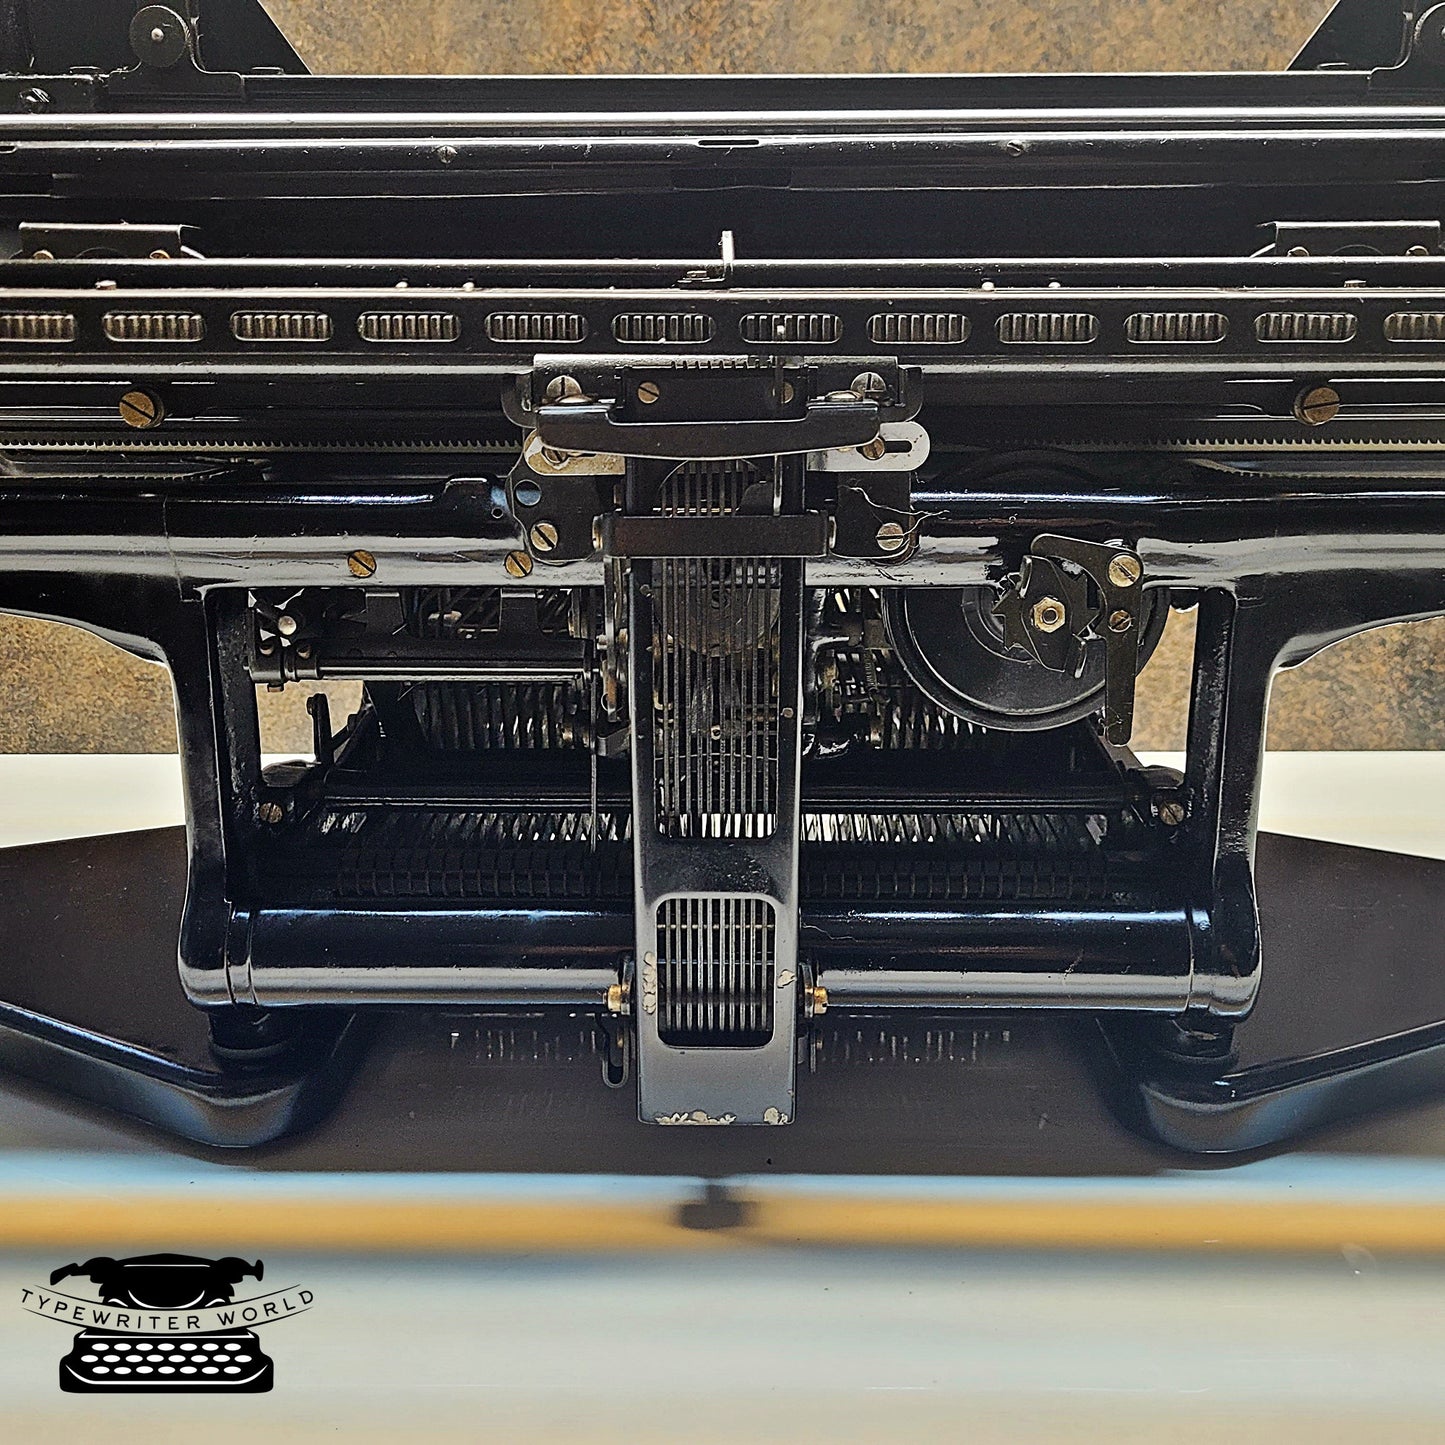 Vintage Continental Rapidus Typewriter - Rare Collectible Model   Serial Number : 933386